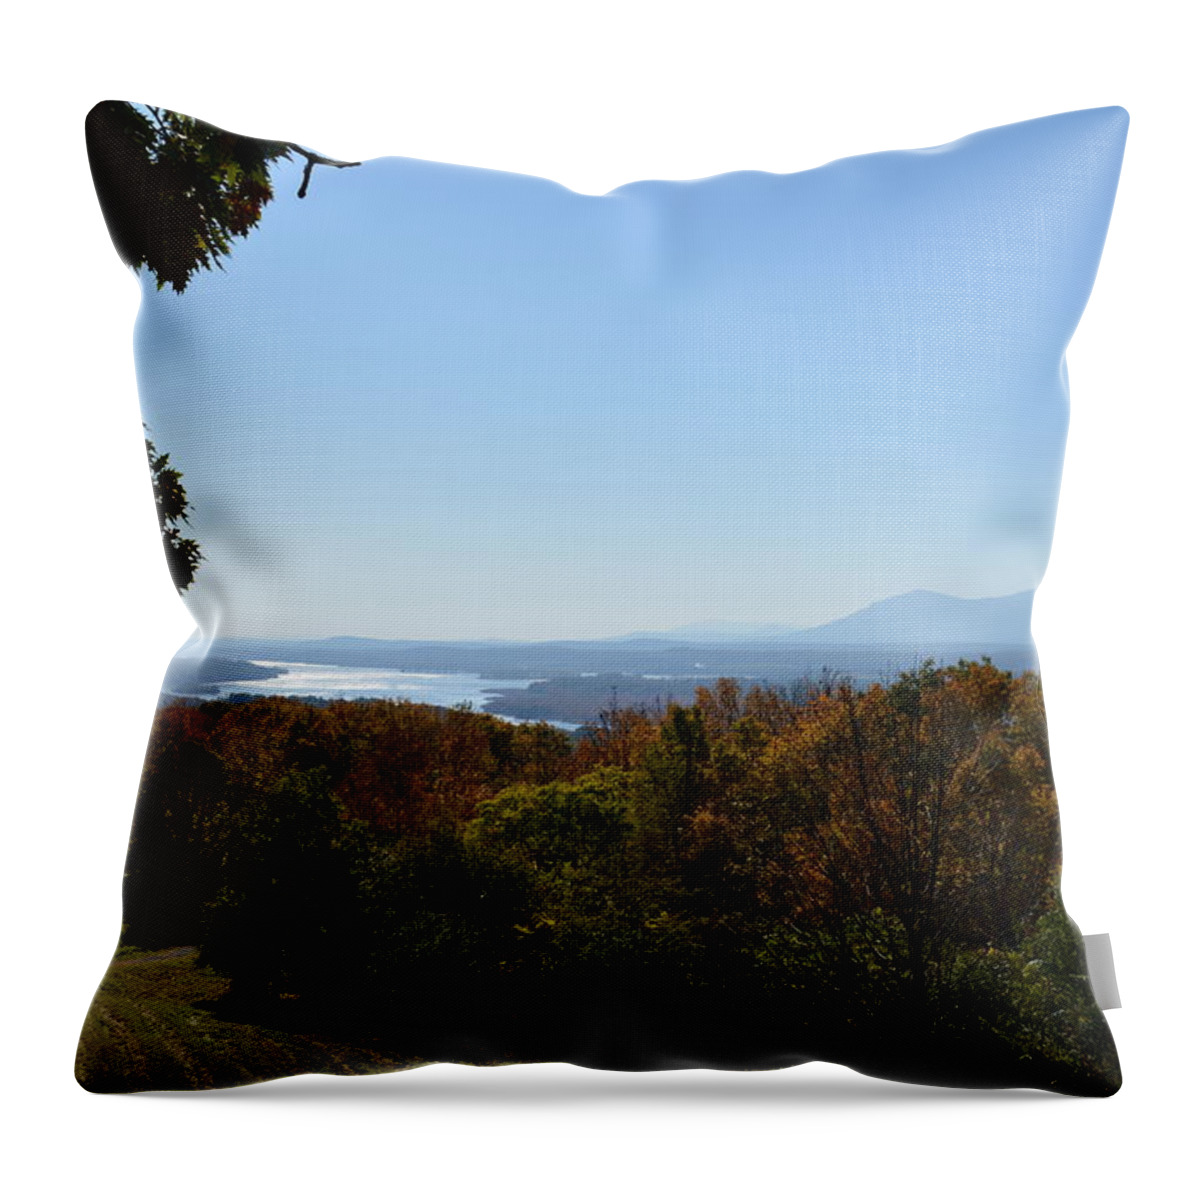 Fall Landscape Of Hudson River From Olana House Catskill New York Throw Pillow featuring the photograph Hudson River View by Kenneth Cole